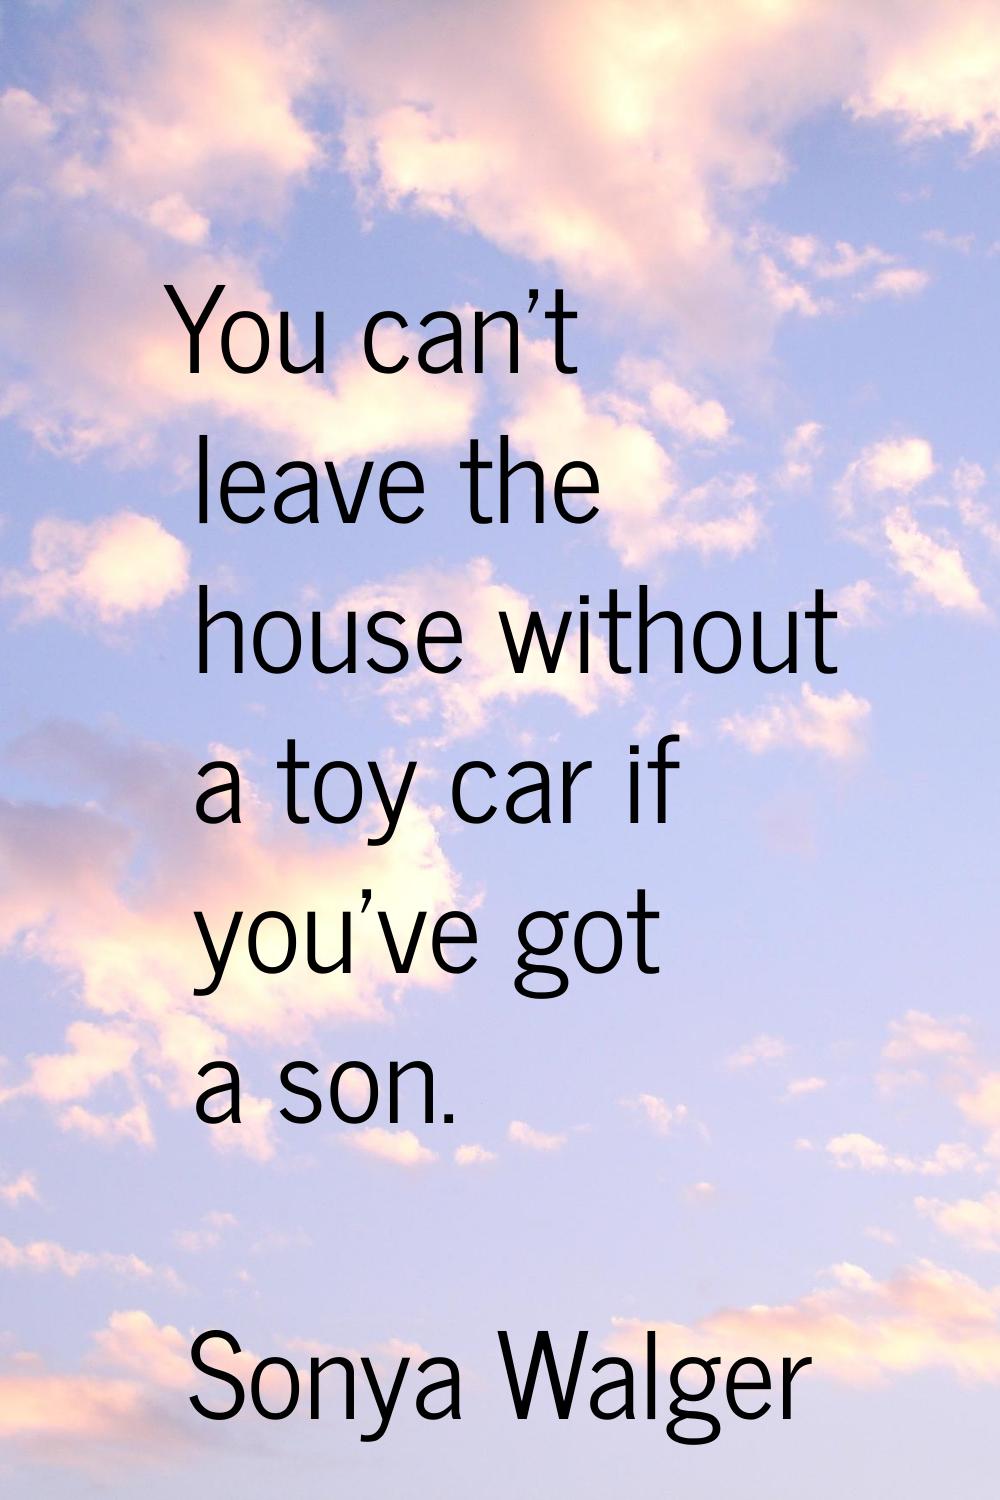 You can't leave the house without a toy car if you've got a son.